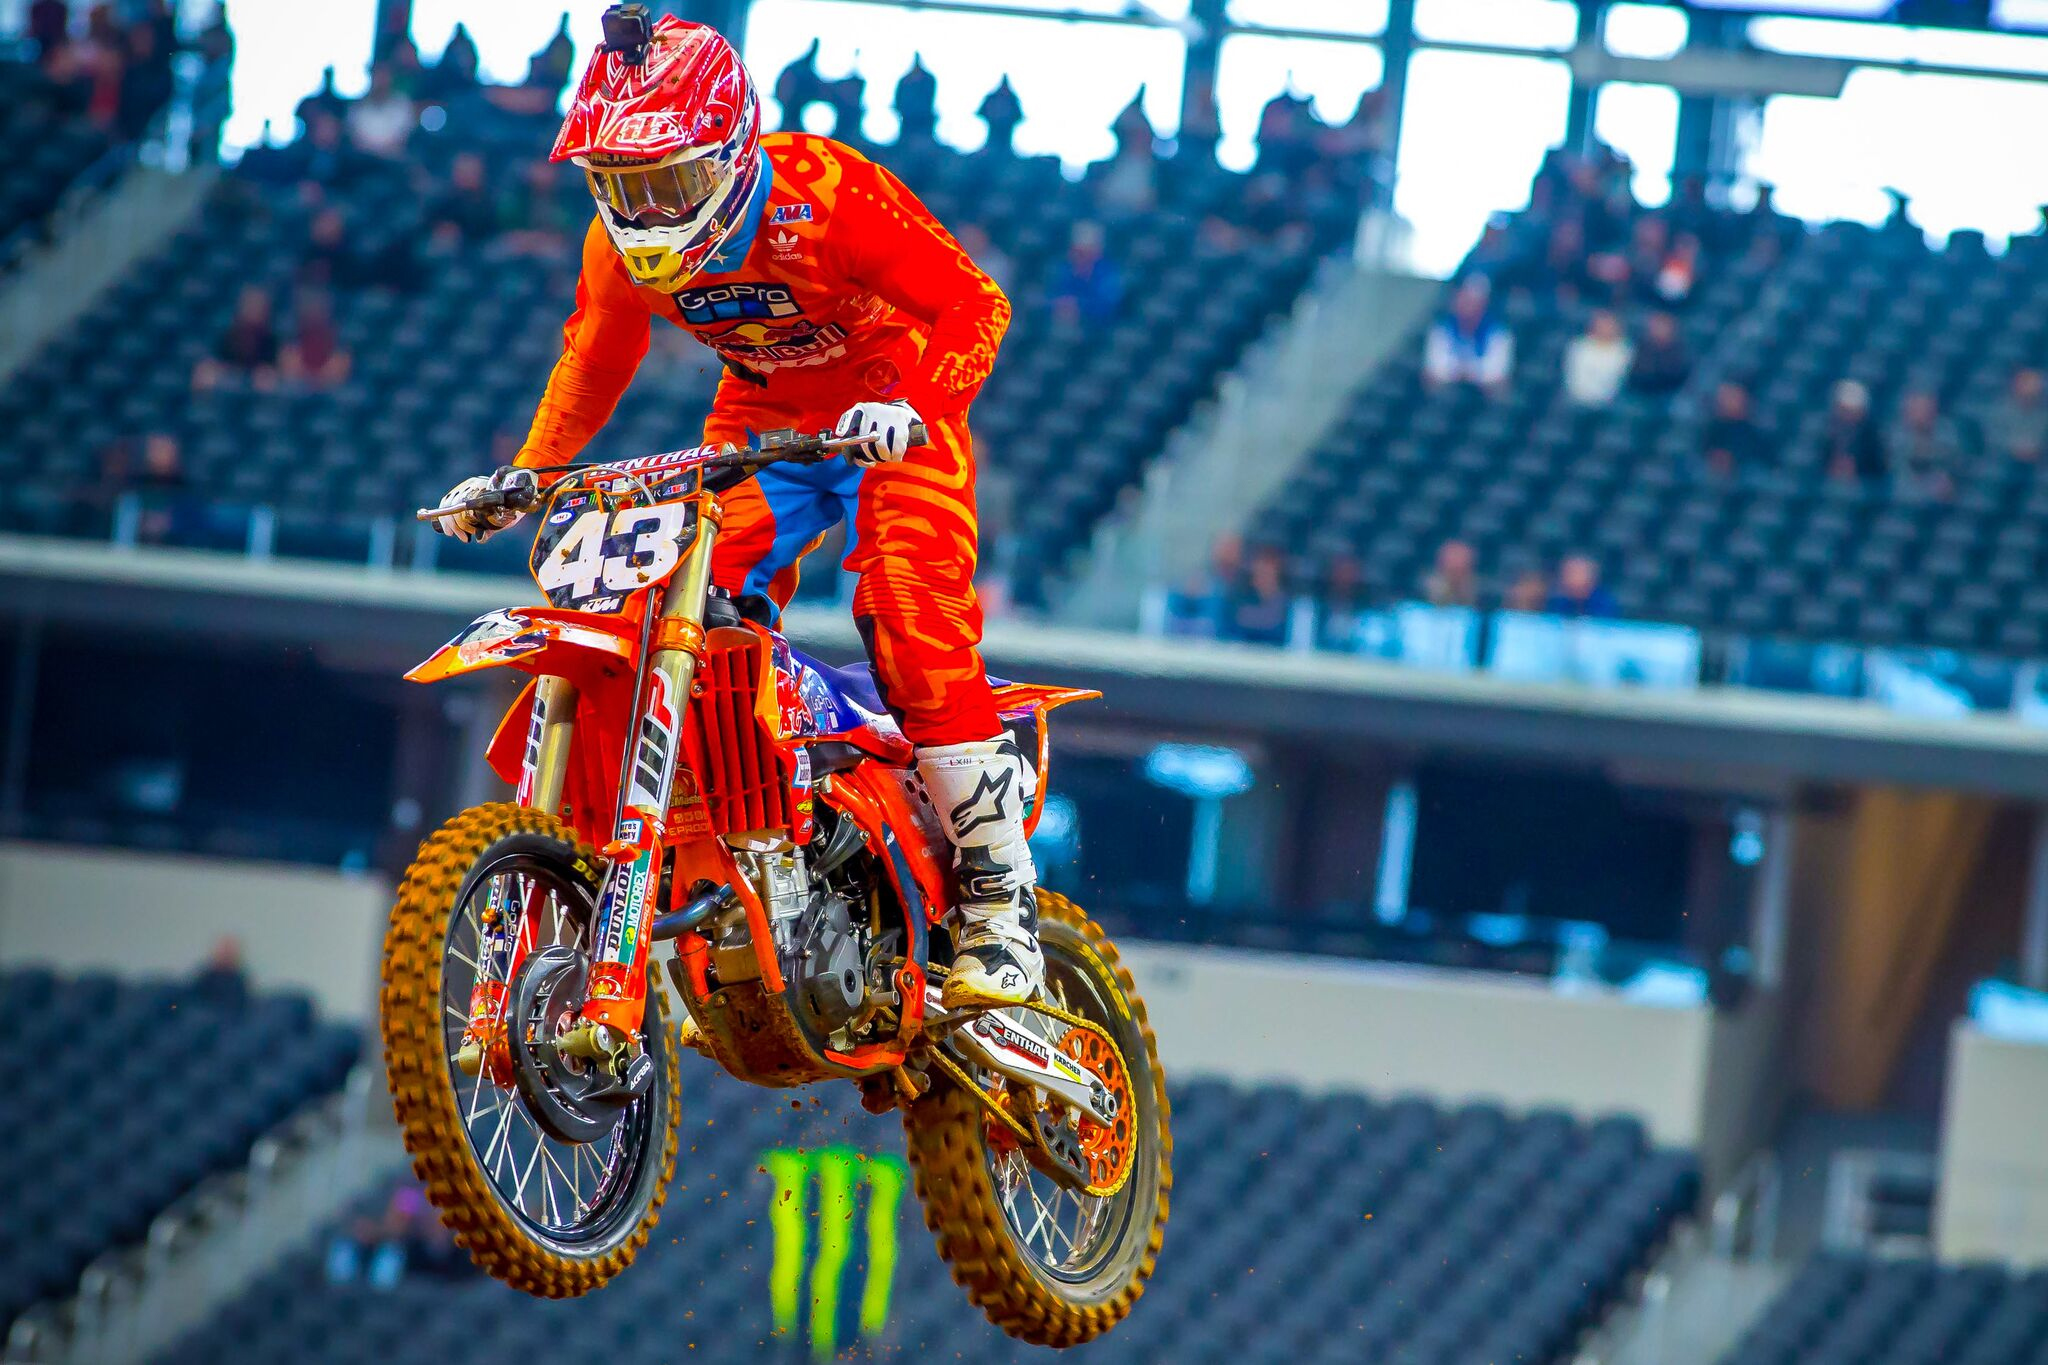 Troy Lee Designs/Red Bull/KTM’s Smith and Cantrell Start Eastern Regional Championship with Top-10 Finishes